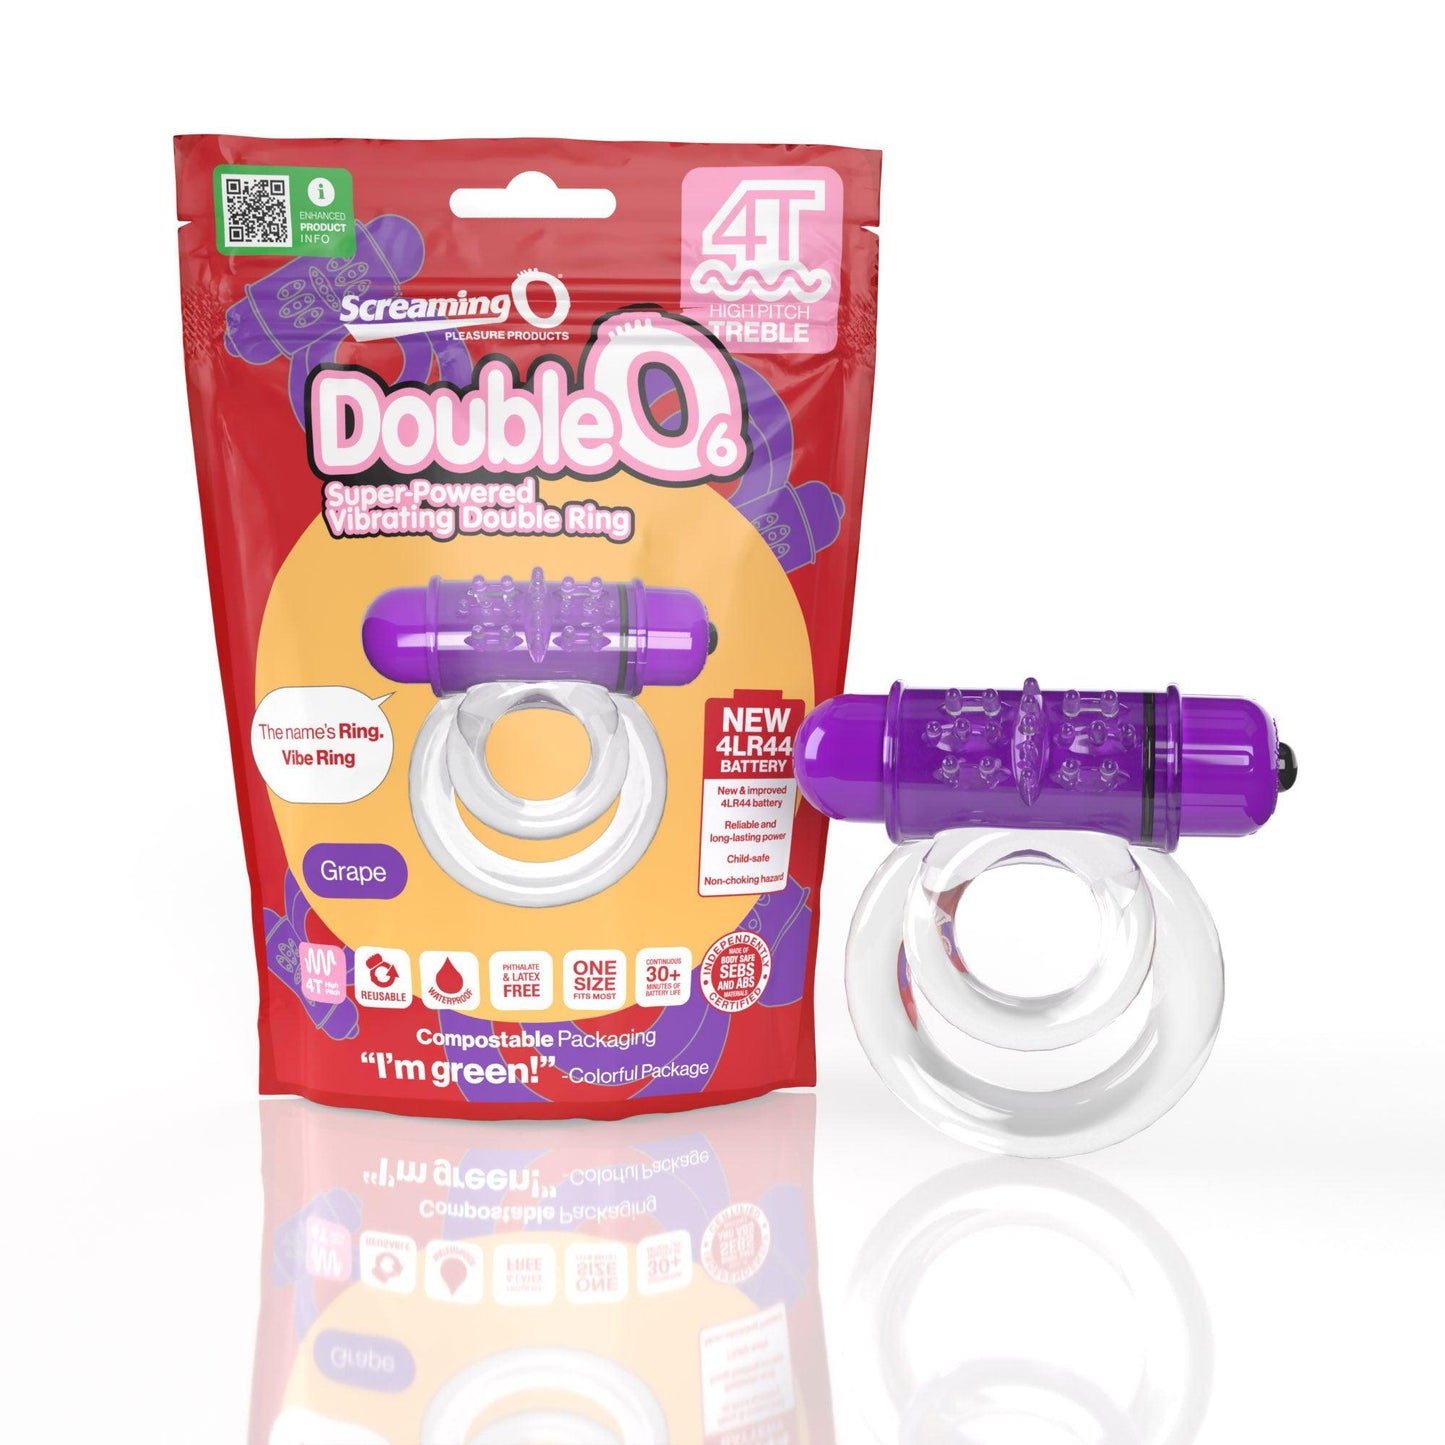 Screaming O 4t - Double O 6 Super Powered   Vibrating Double Ring - Grape